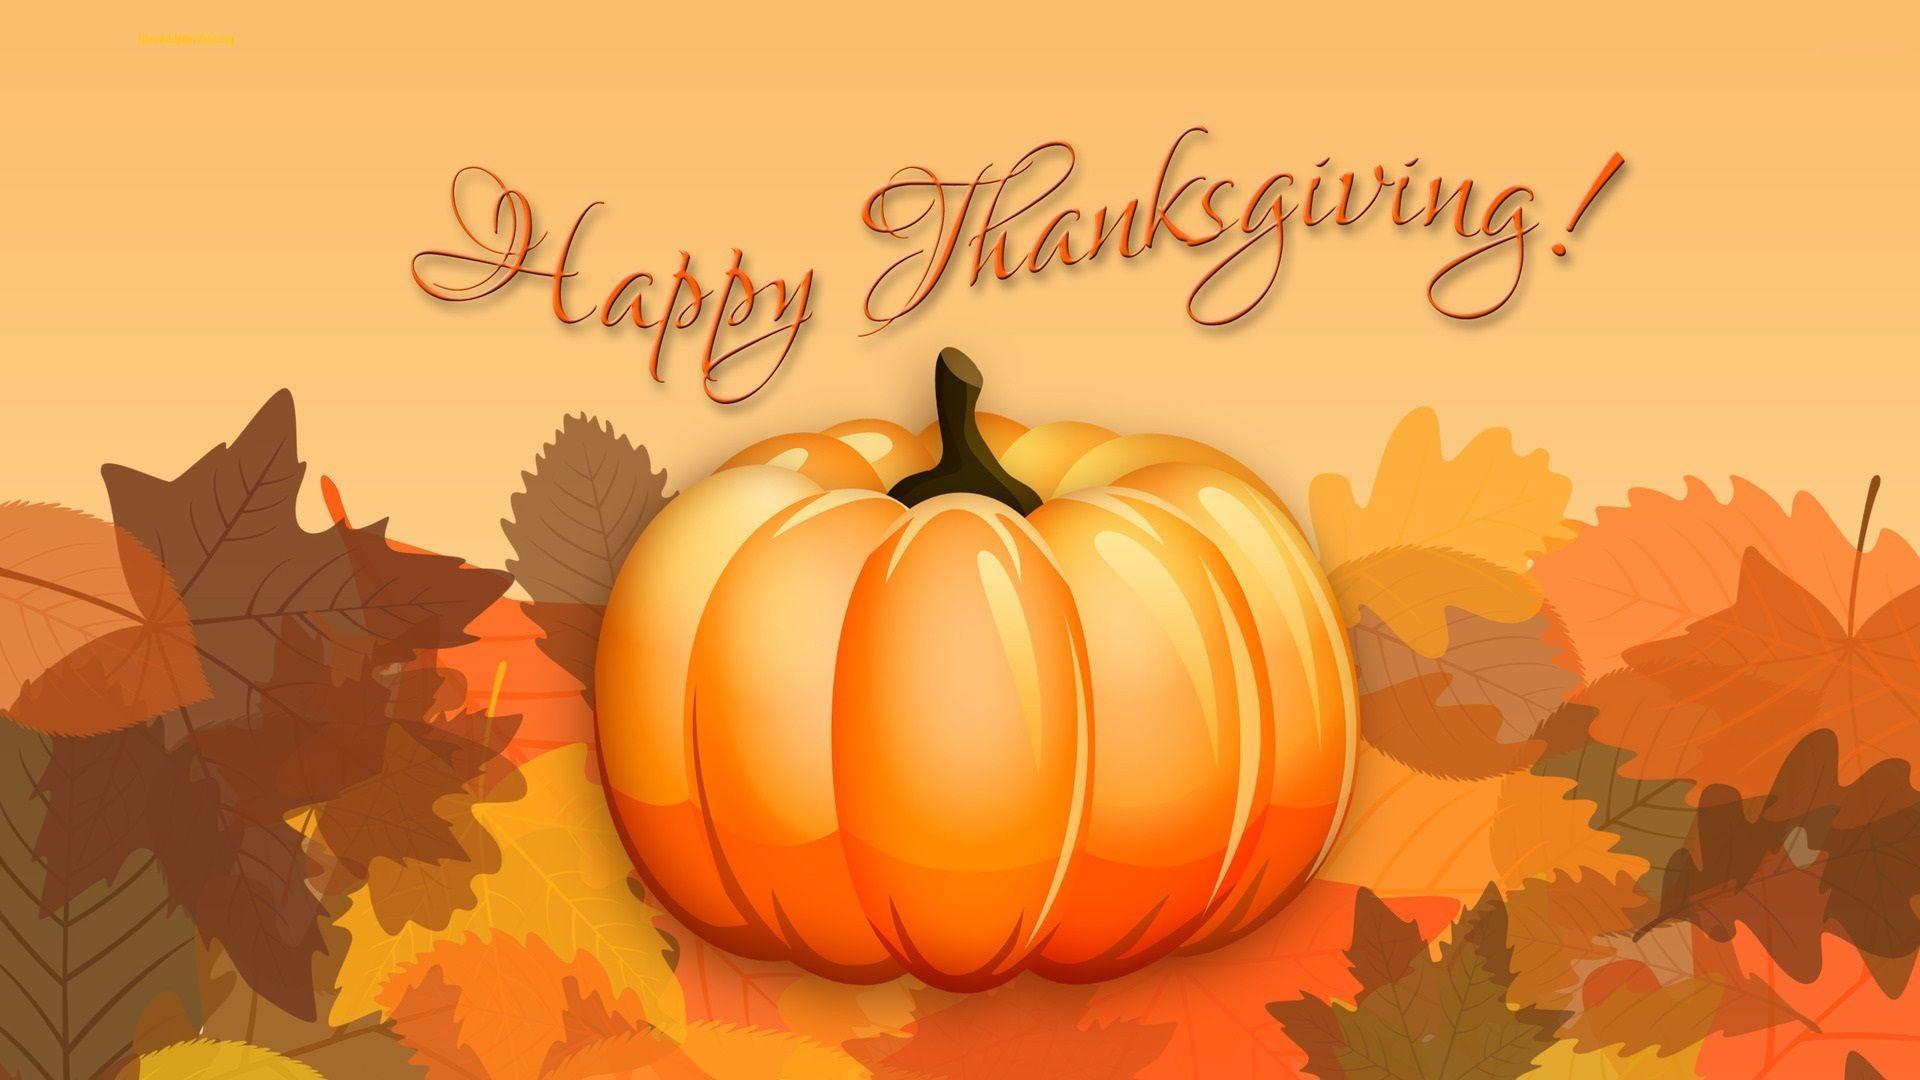 Happy Thanksgiving Day Wallpapers - Top Free Happy Thanksgiving Day